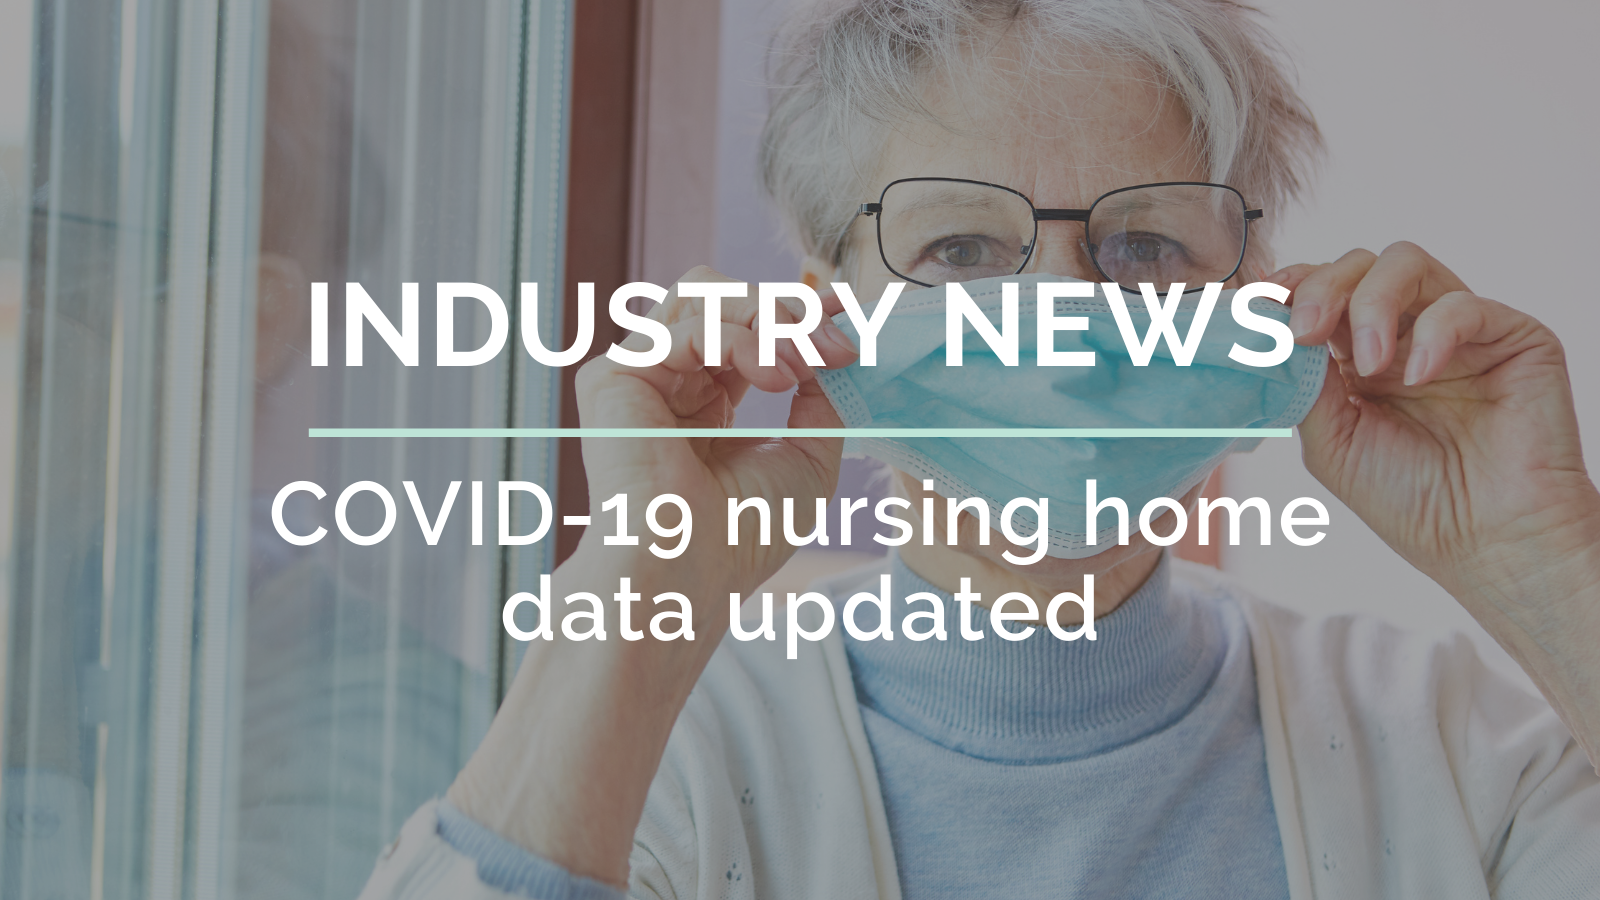 COVID19 nursing home data updated Simple, a Netsmart solution